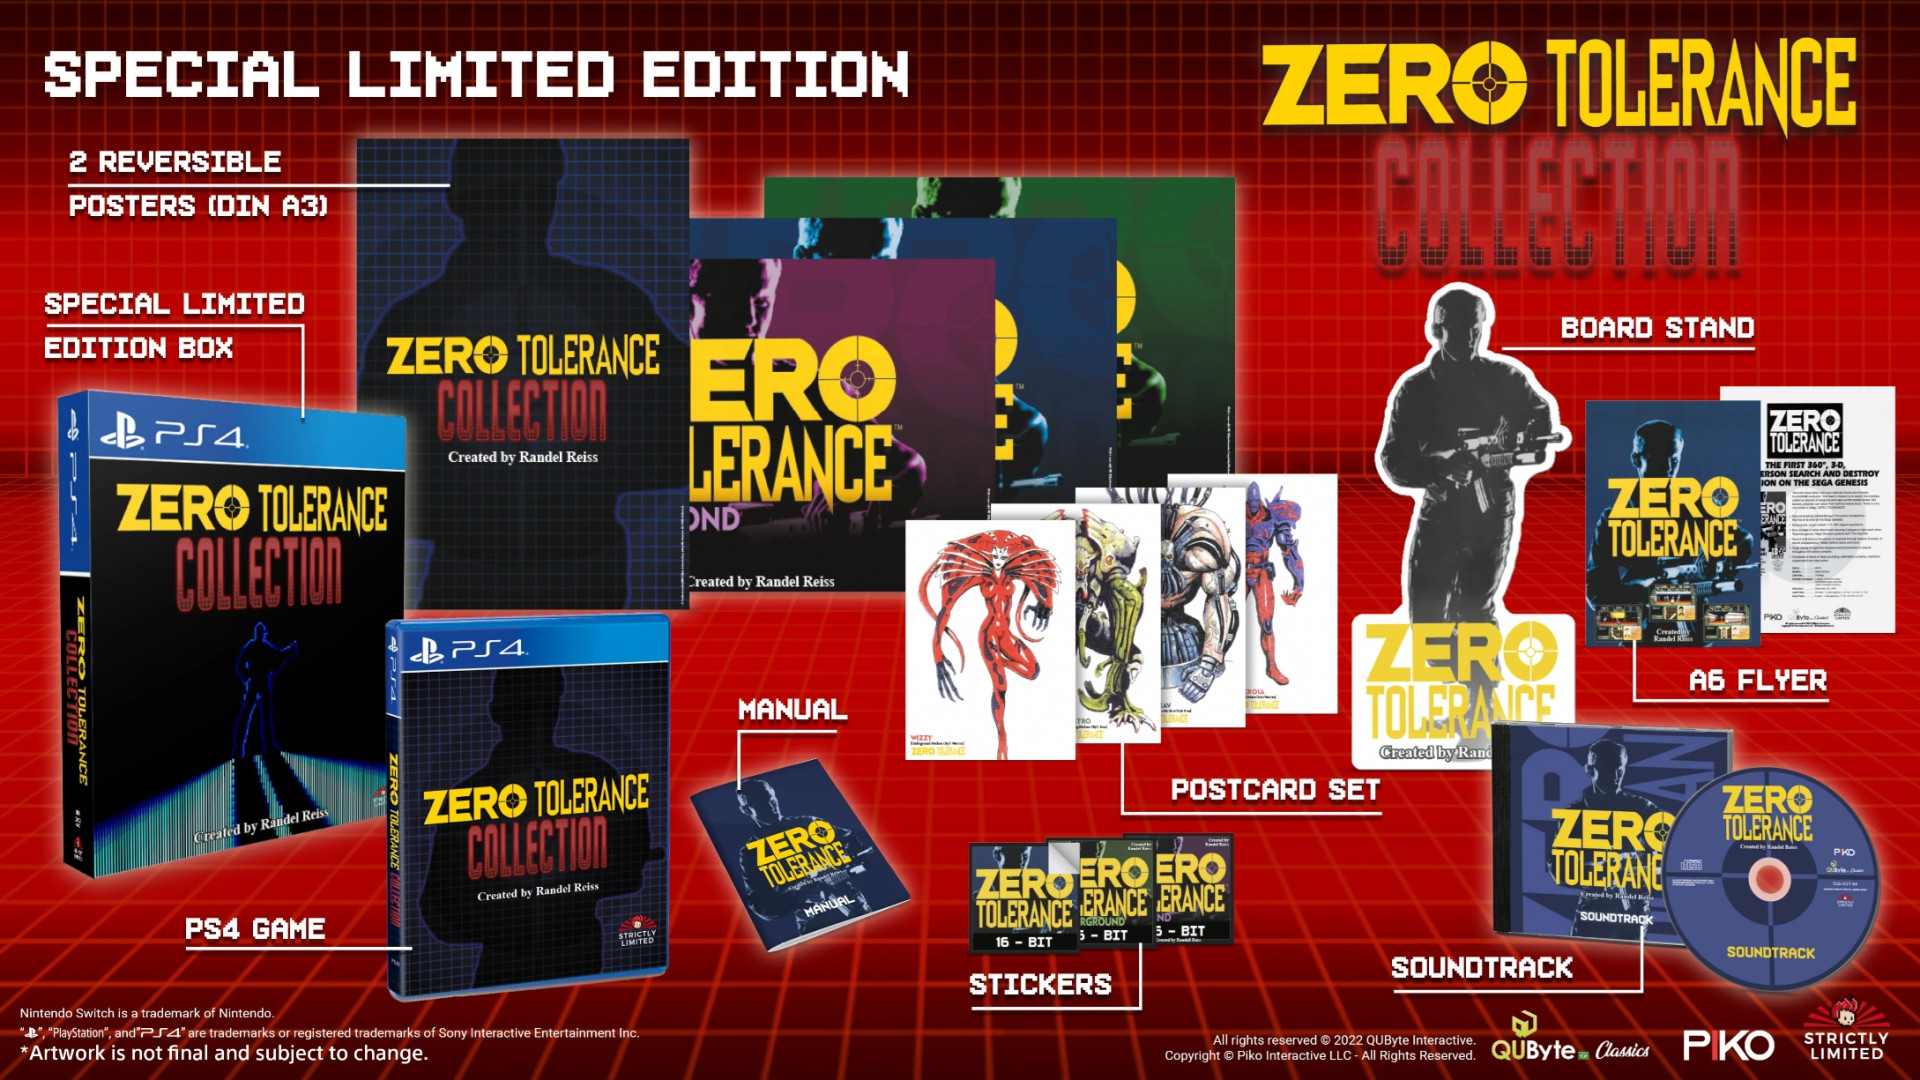 Zero Tolerance Collection - Special Limited Edition (Strictly Limited) (PS4), Piko Interactive